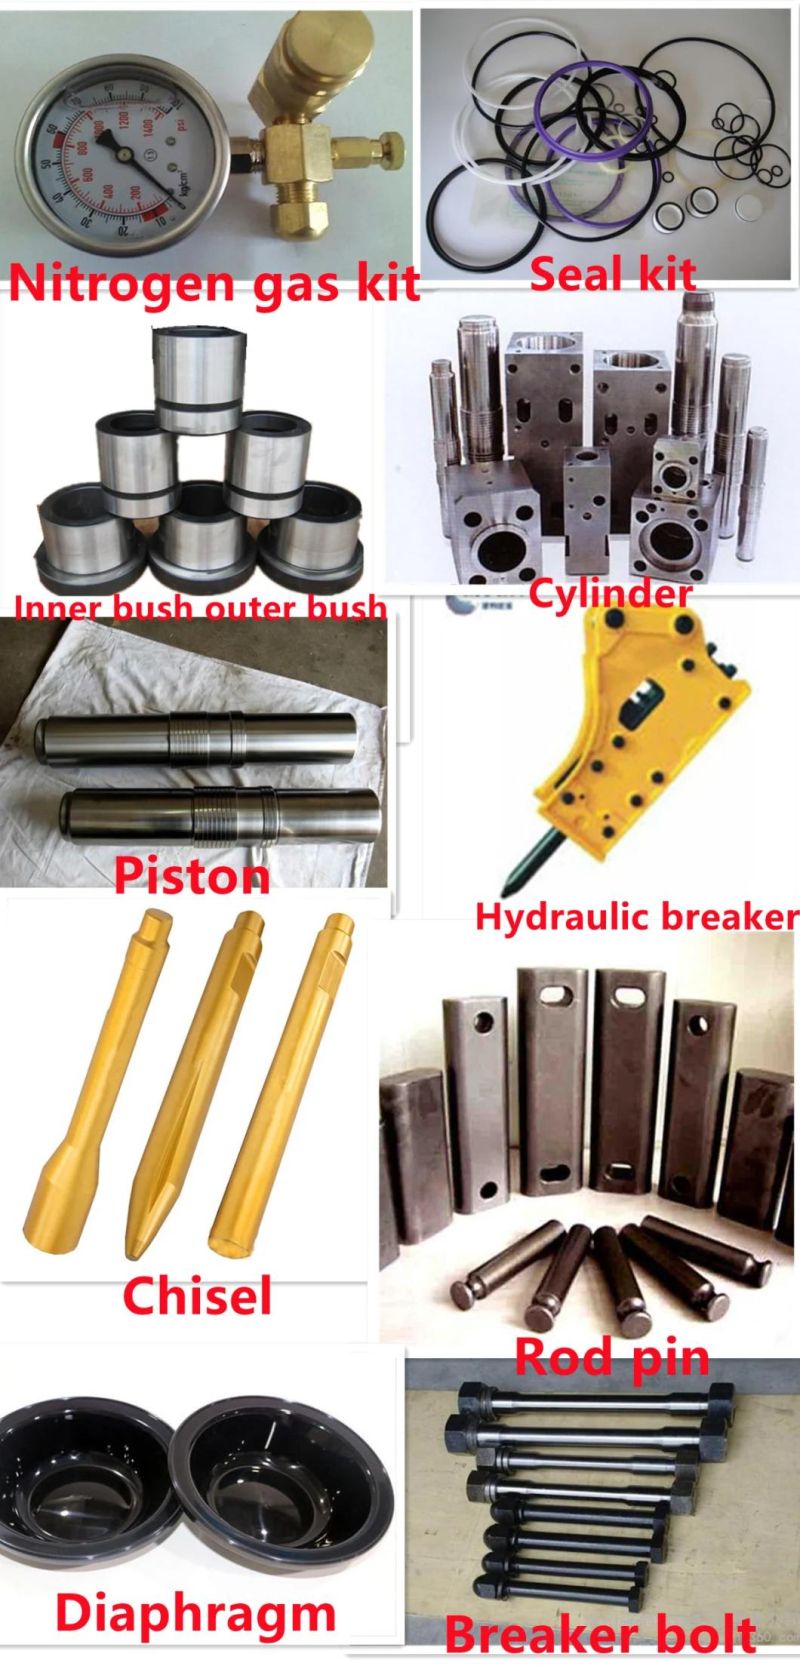 Nbk Construction Machinery Demolition Mining Excavator Kit Hydraulic Hammer Pipeline Kit with High Precision Anticorrosive